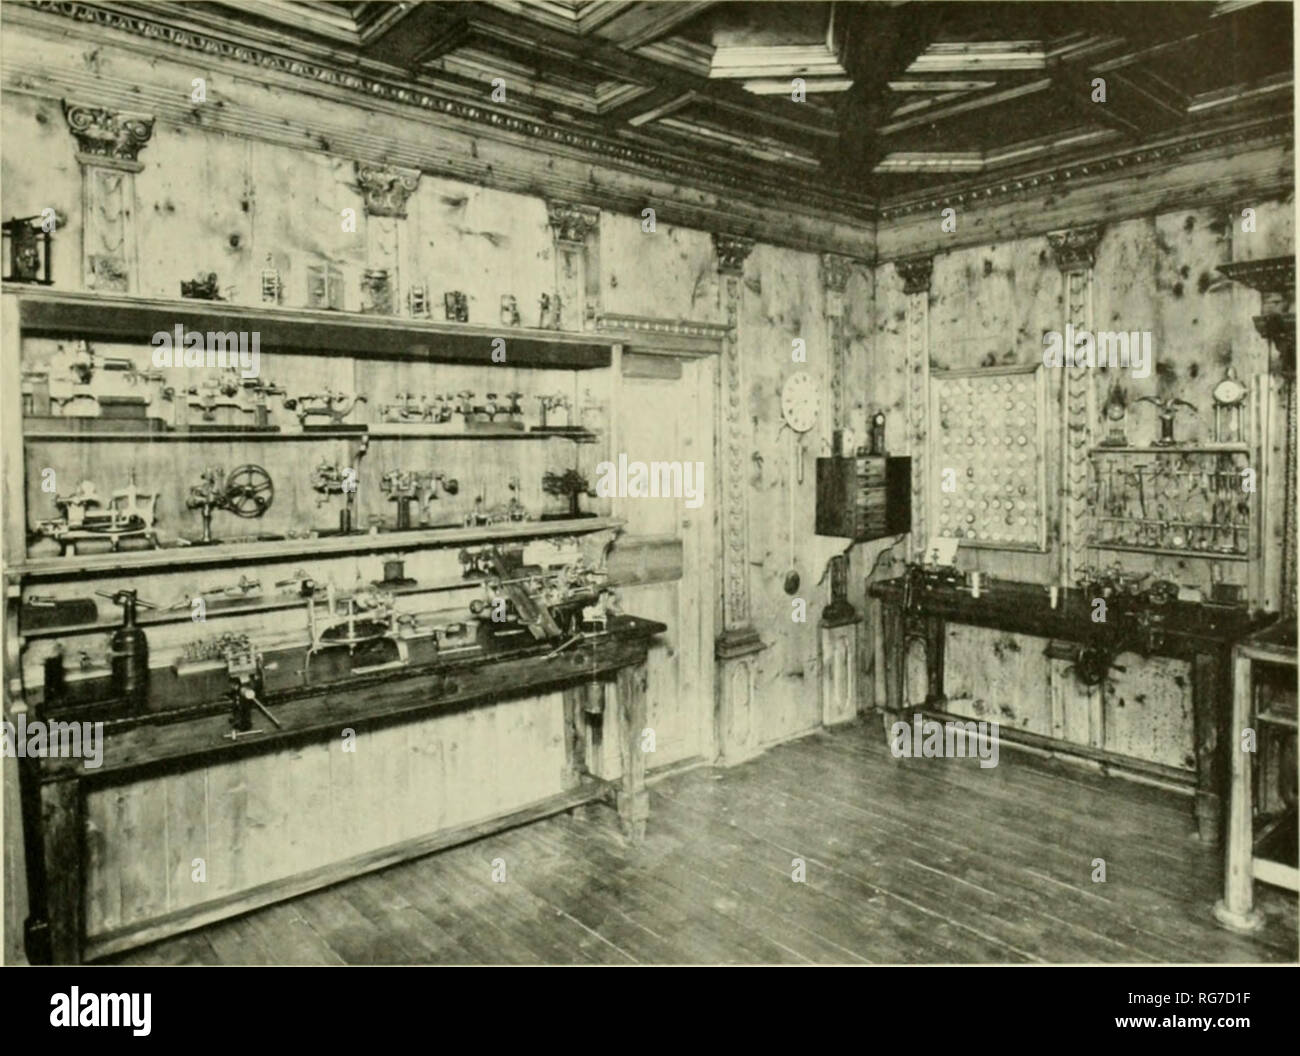 Bulletin - United States National Museum. Science. Figure j;j.—Interior of  Bertoixa's workshop, showing the main workbench and thi lection of  clockmakers' tools. {Cow! , q) I/,. Vazionale delta Sciei Milan.) Figure